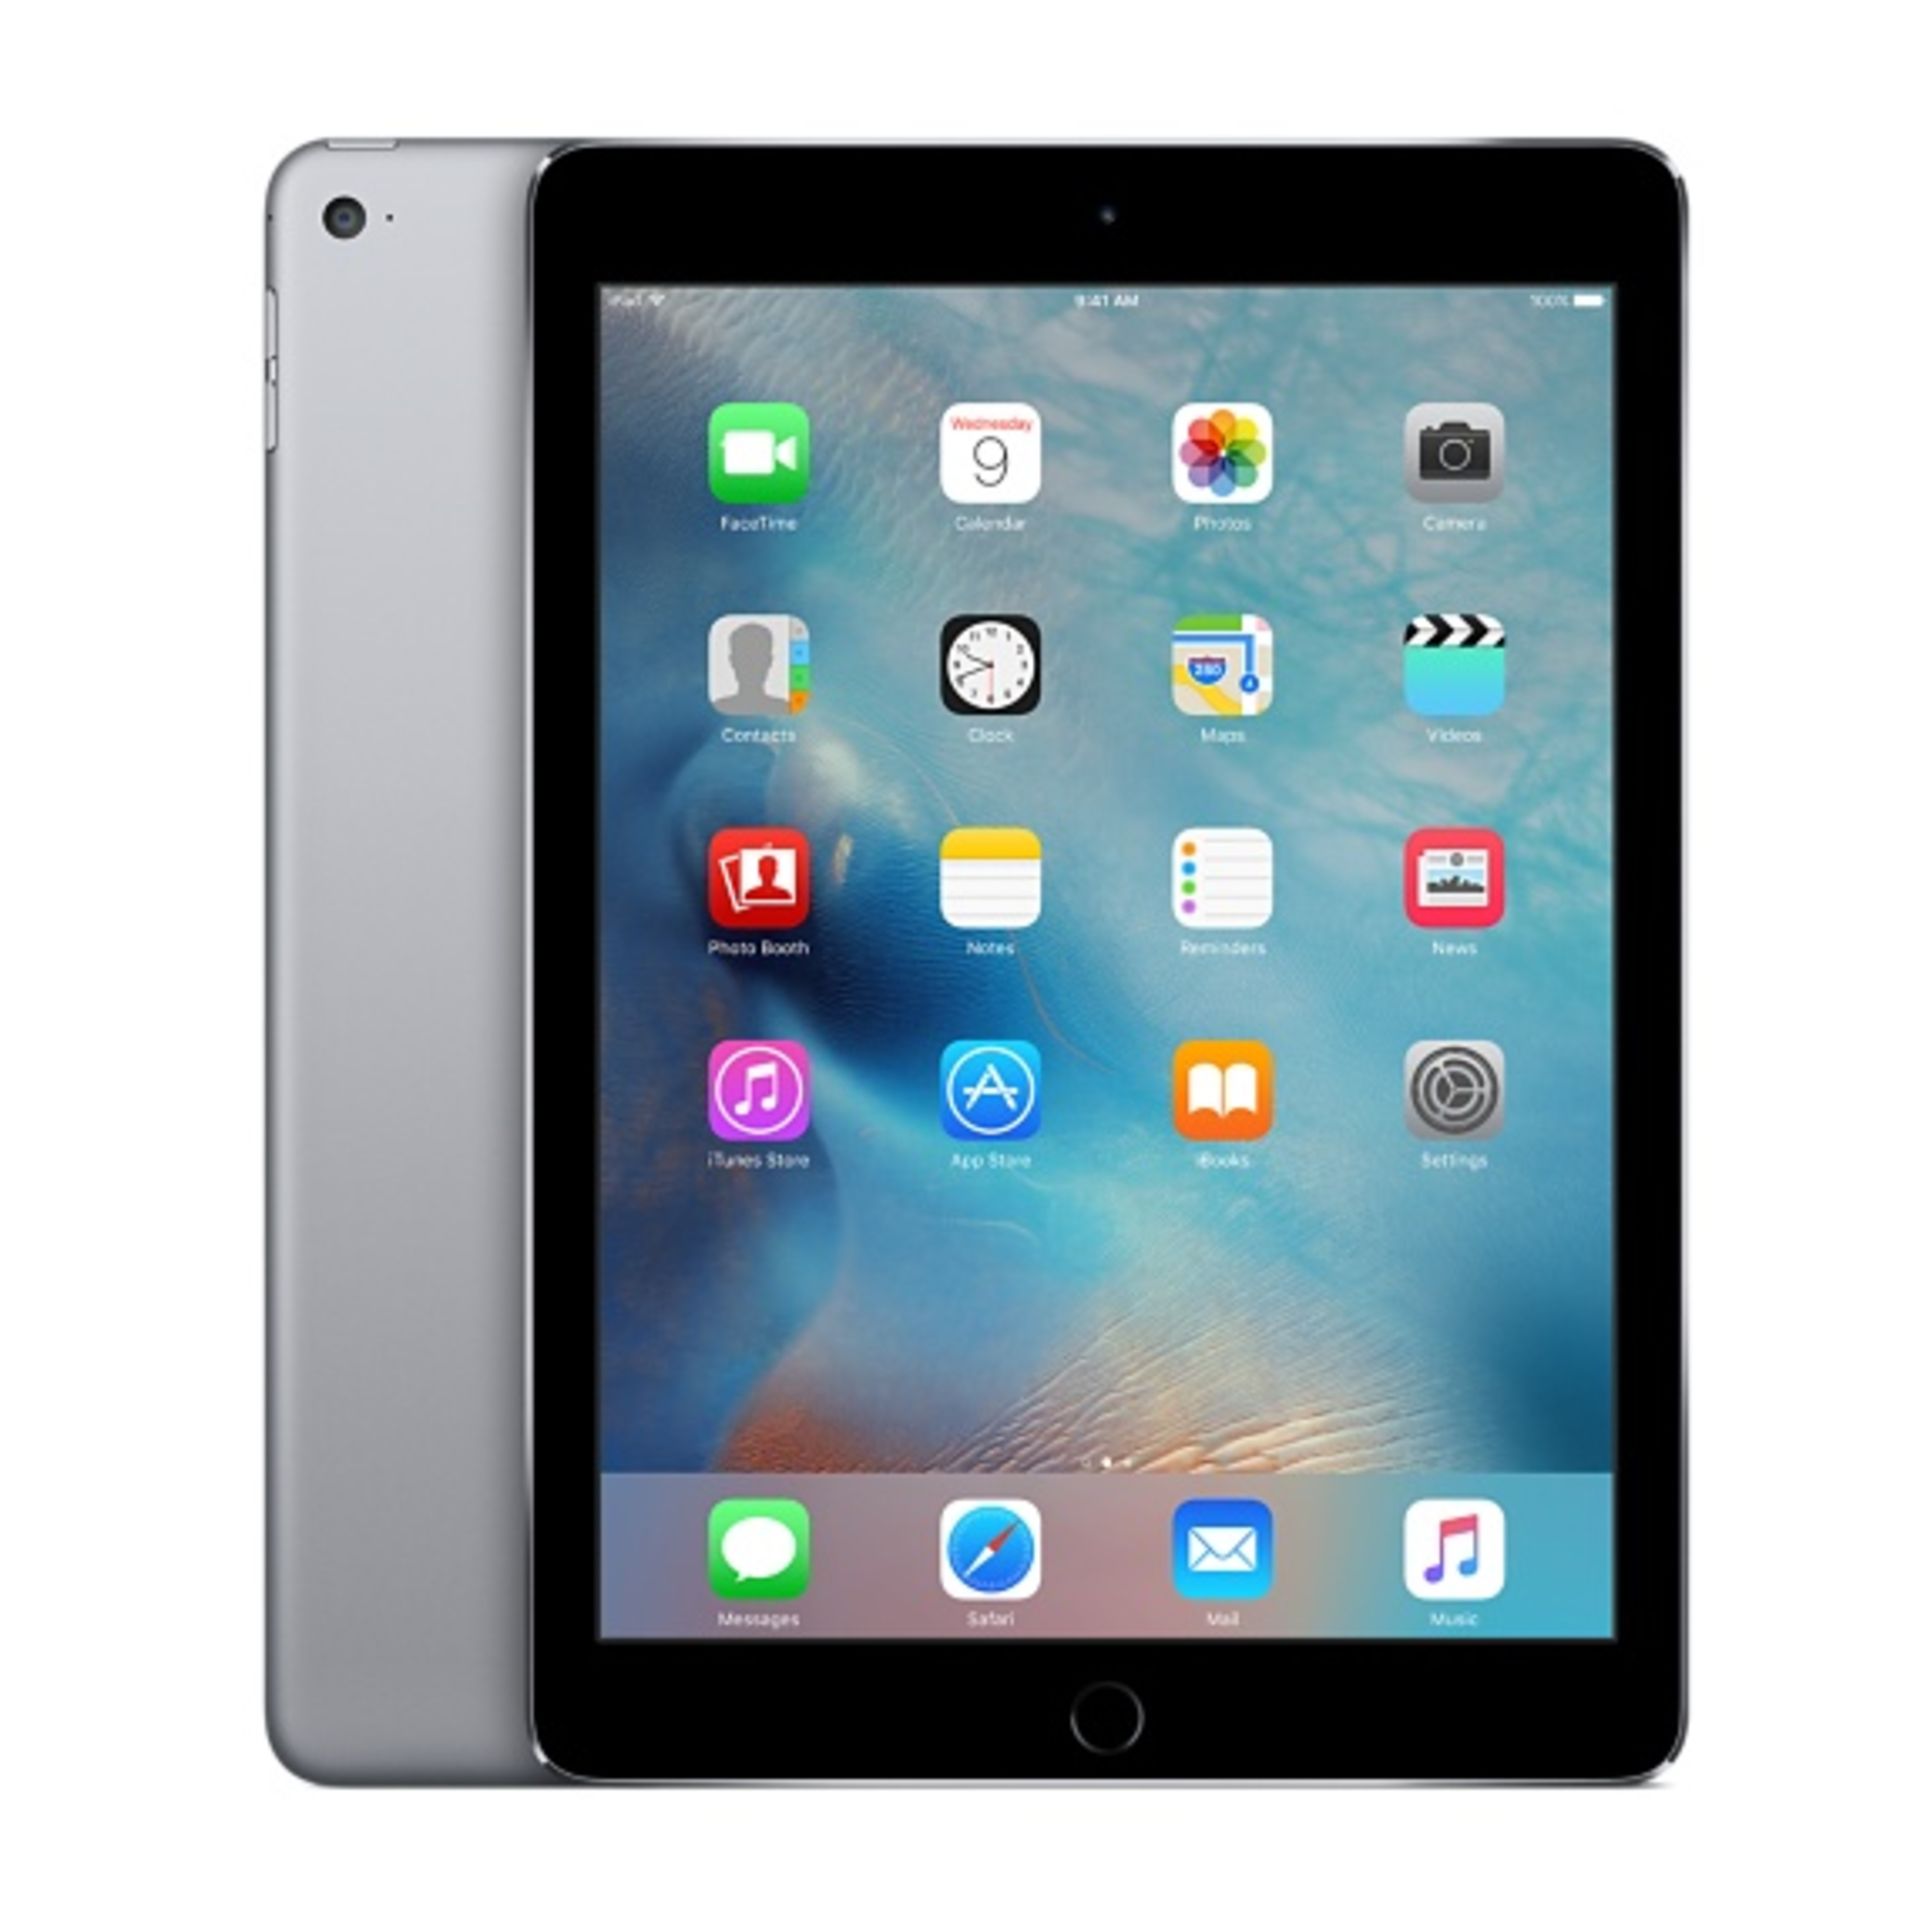 V Grade A Apple iPad Air 2 32GB Space Grey - Wi-Fi - In Generic Box - With Apple Accessories